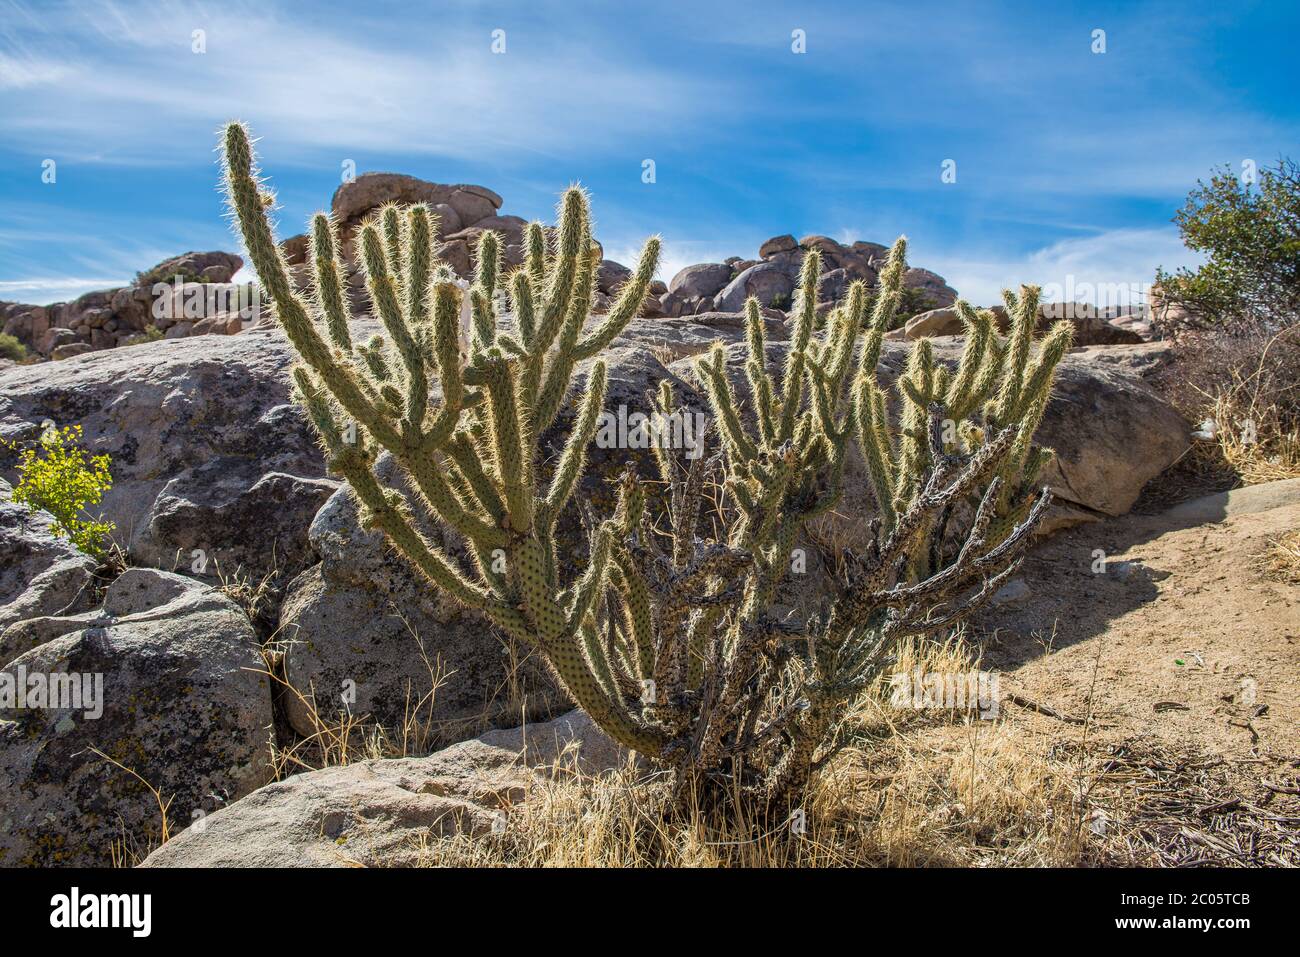 Cactus on the rocky mountains in the desert of Mexico, near La rumorosa and Mexicali, Baja California, Mexican landscape concept Stock Photo